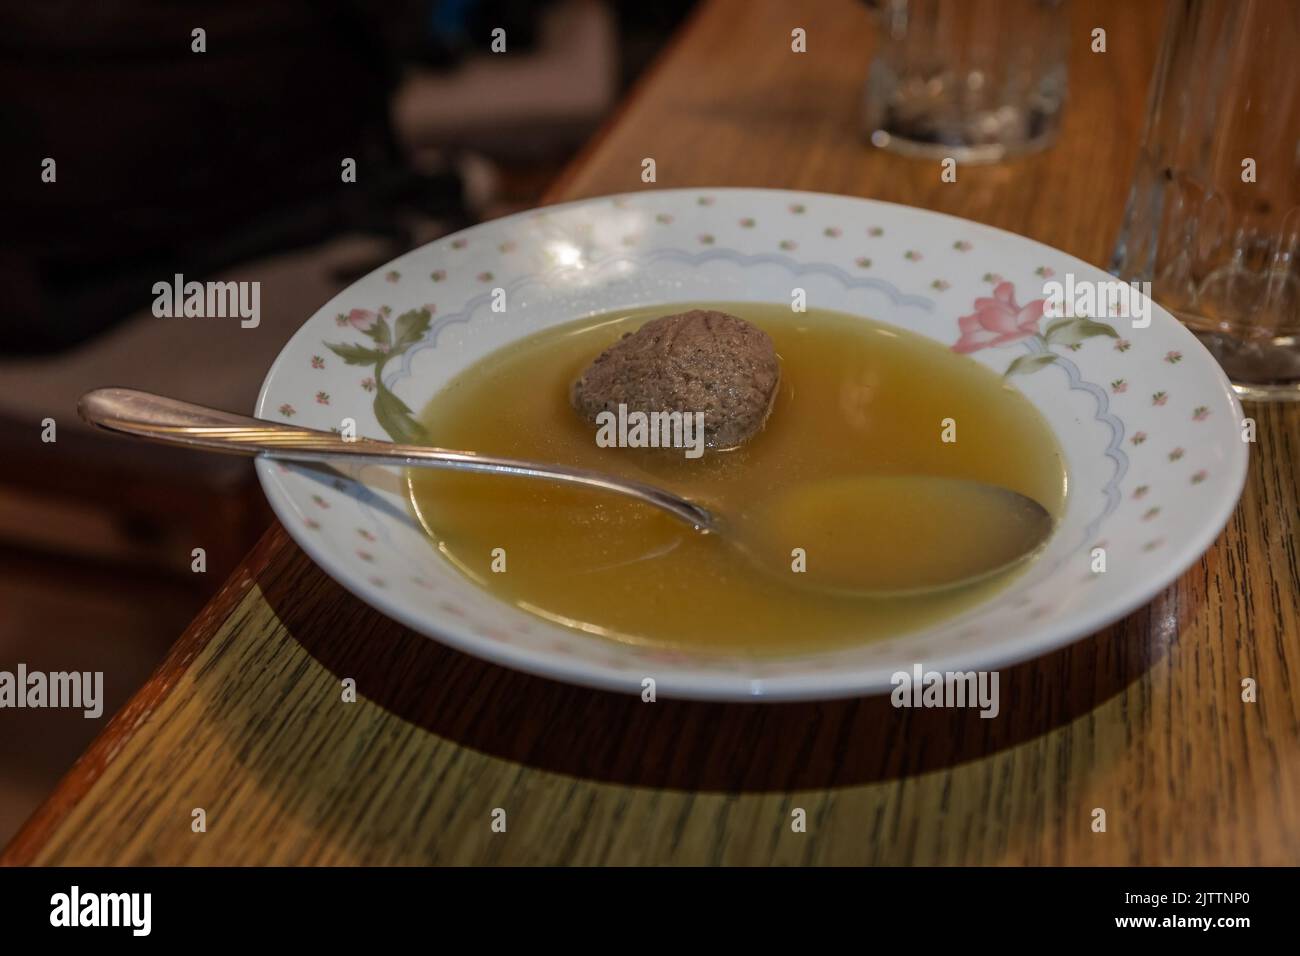 Beef soup with meat ball inside floading in a ceramic bowl or plate resting on a wooden table. Stock Photo